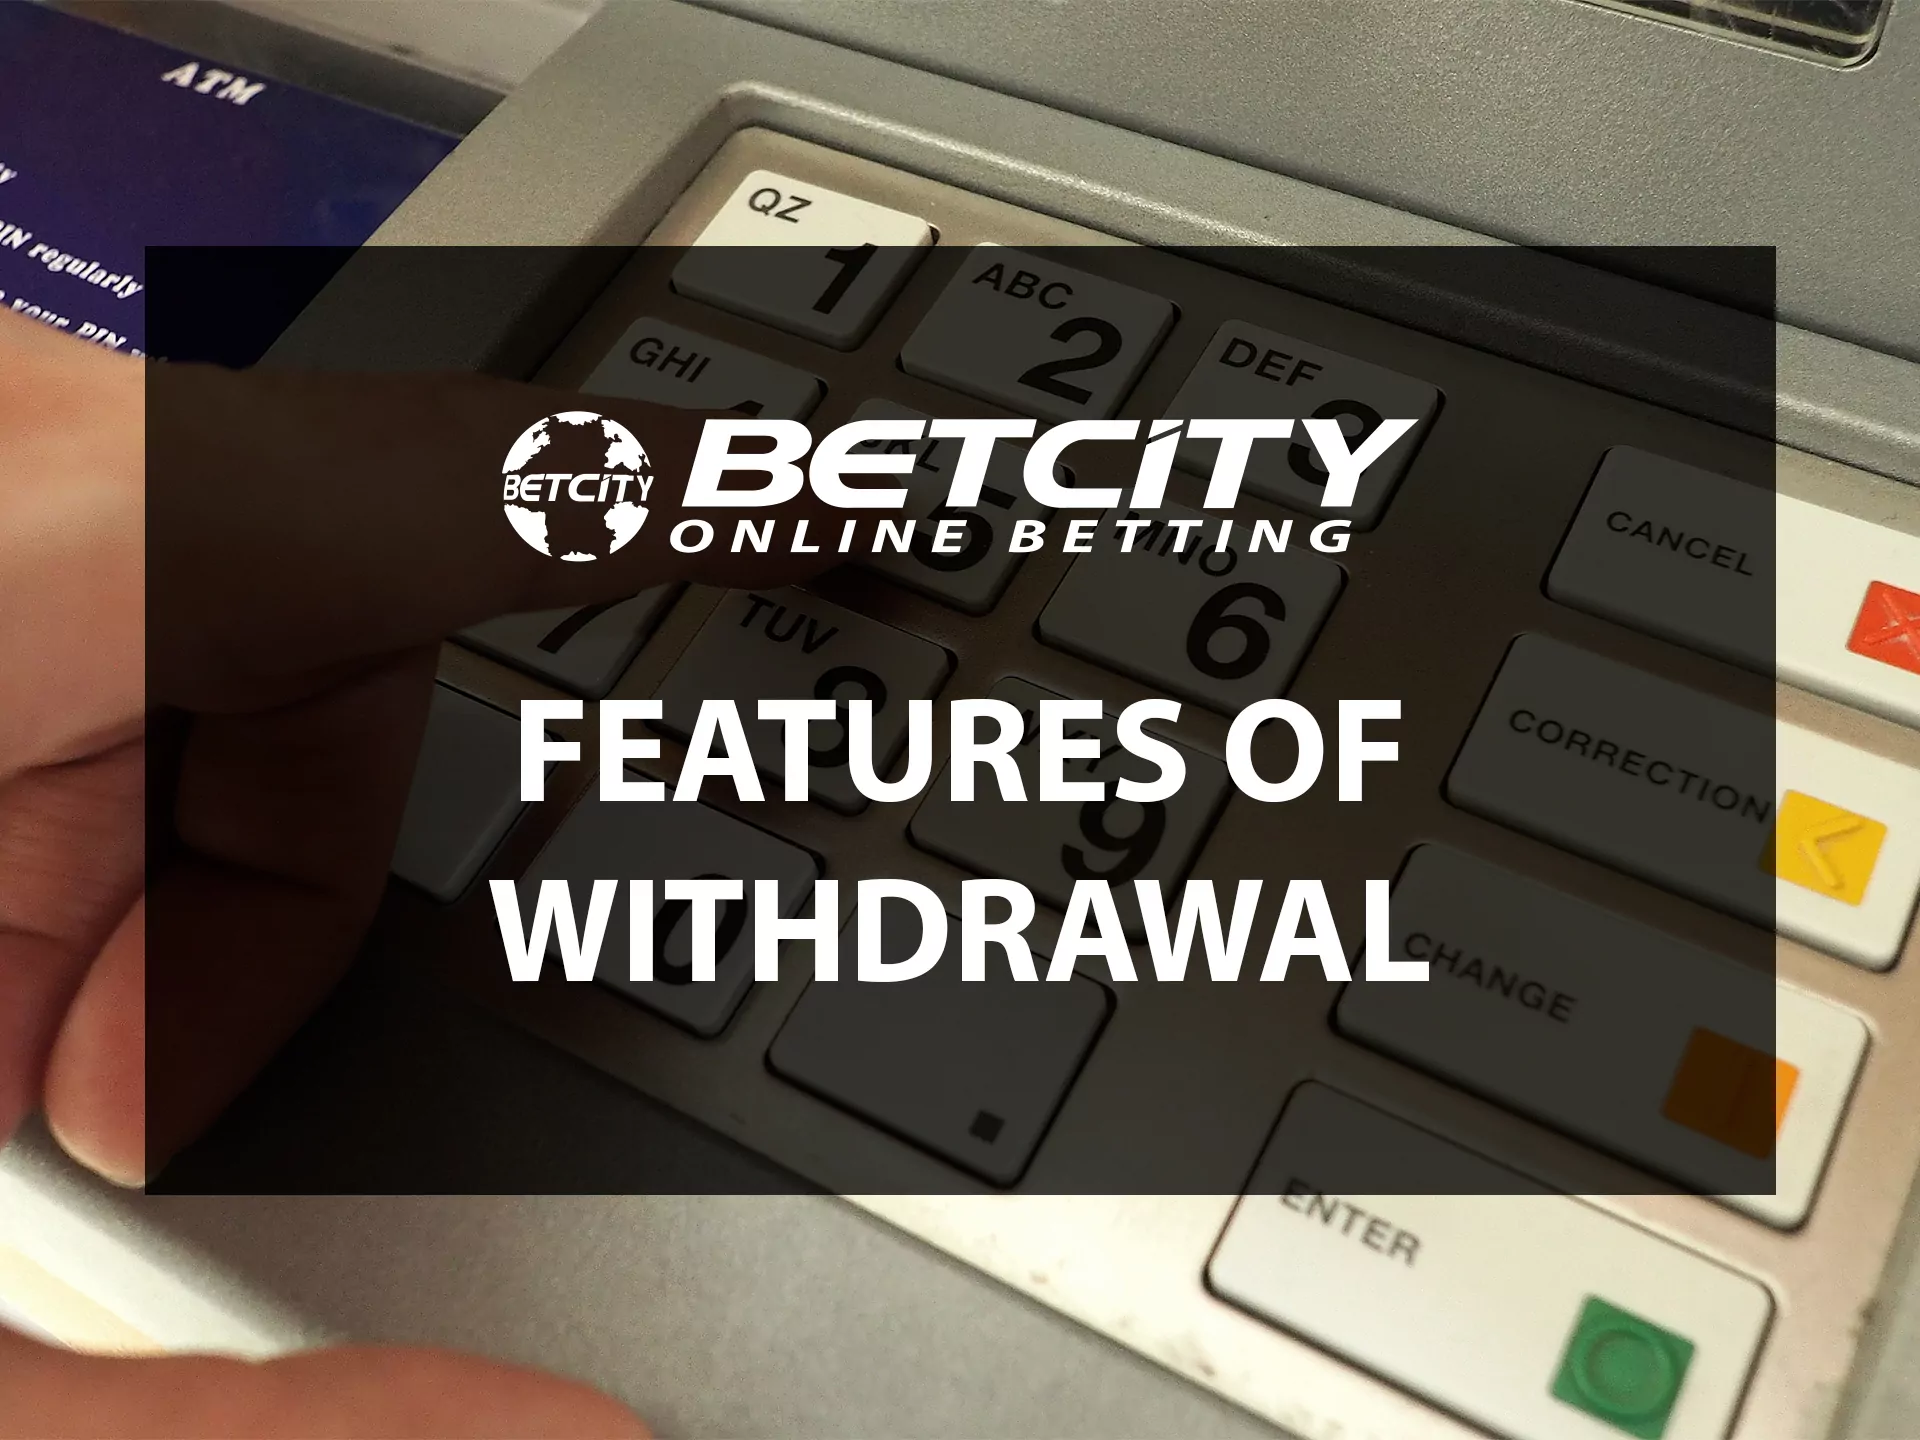 You can easily withdraw your winnings from the Betcity account.